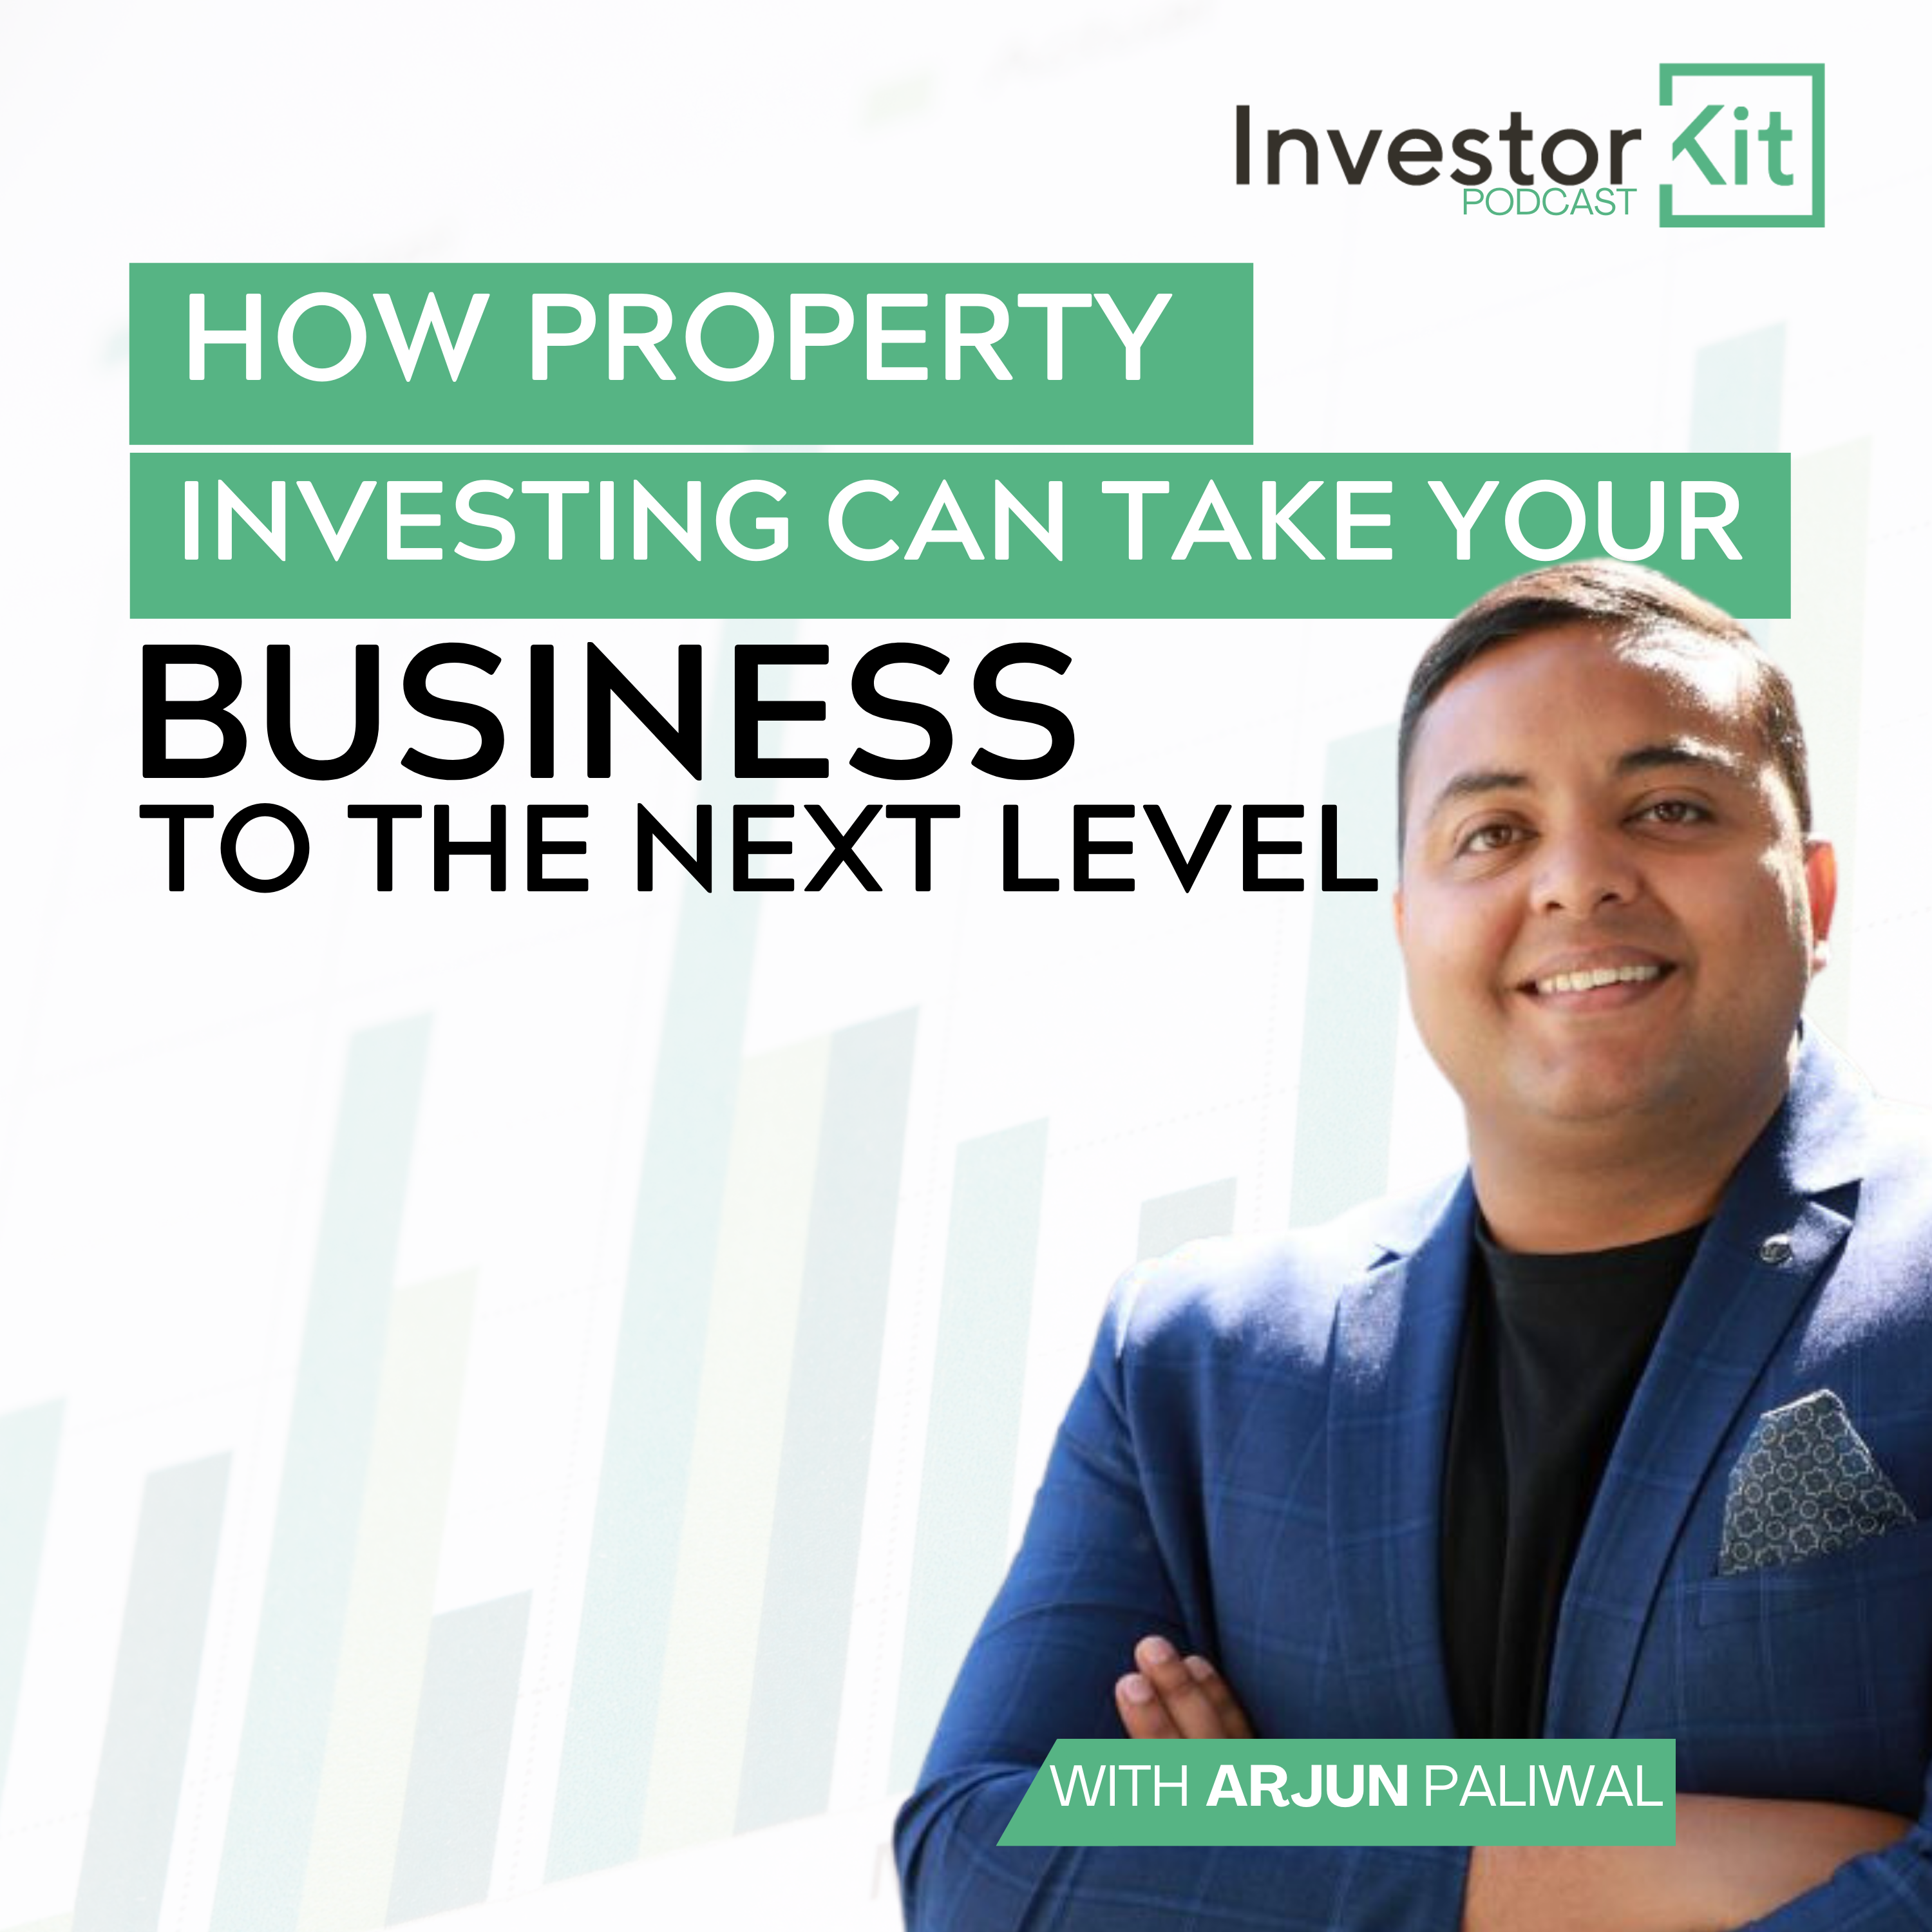 How Property Investing Can Take Your Business to the Next Level